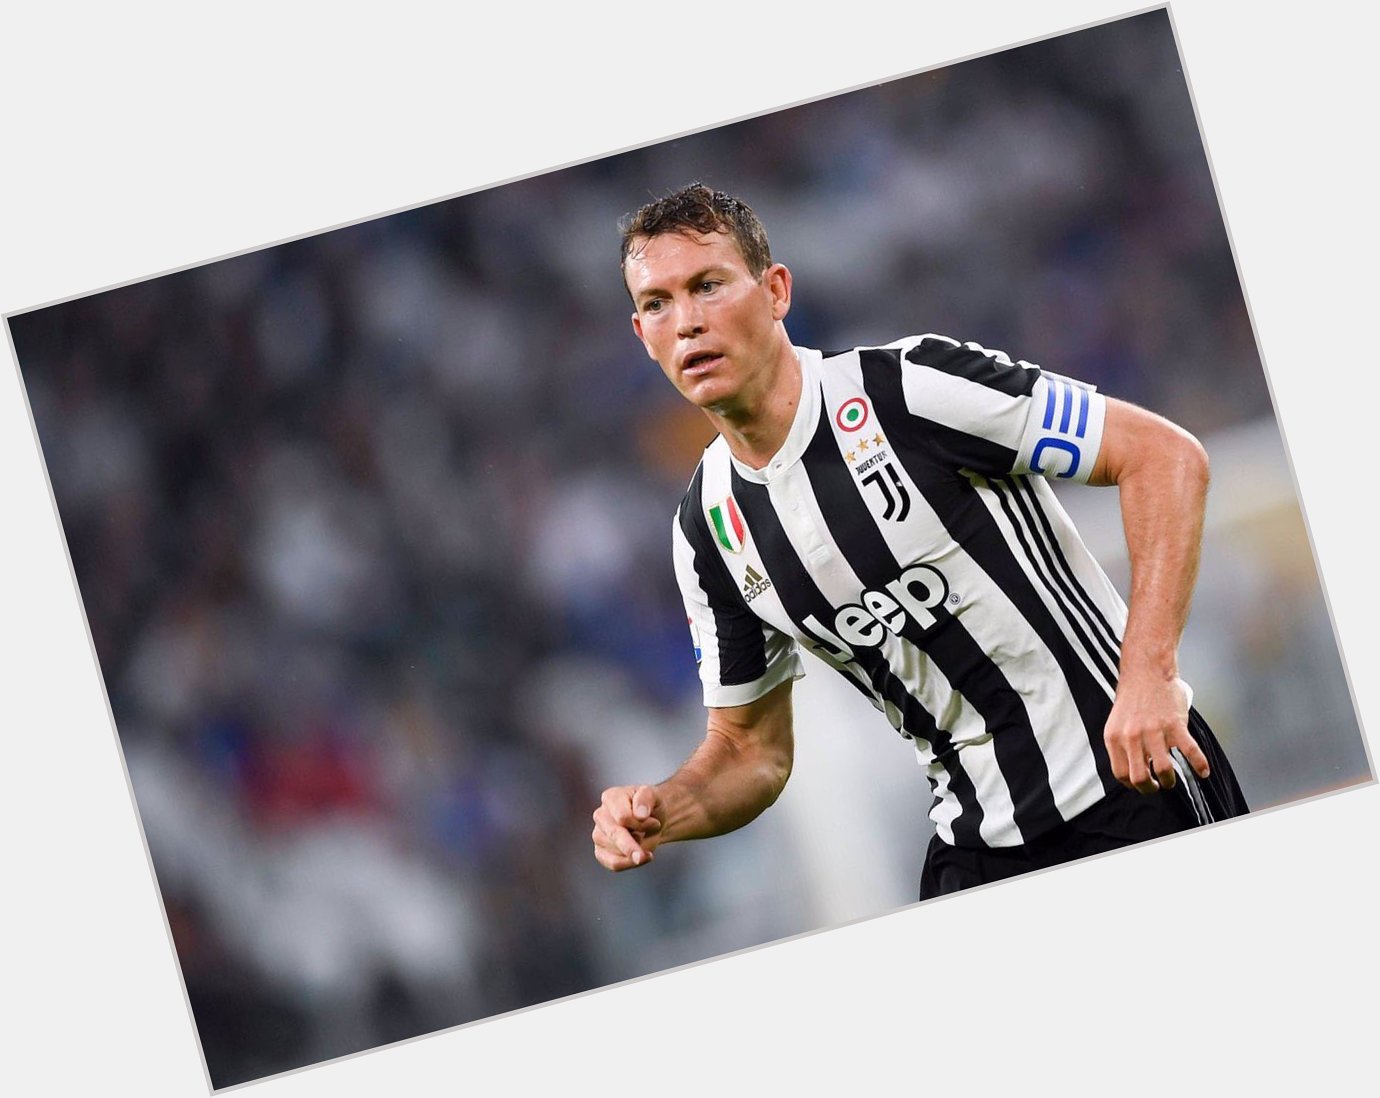 Happy birthday to Juventus right-back Stephan Lichtsteiner, who turns 34 today.

Games: 243
Goals: 15 : 9 